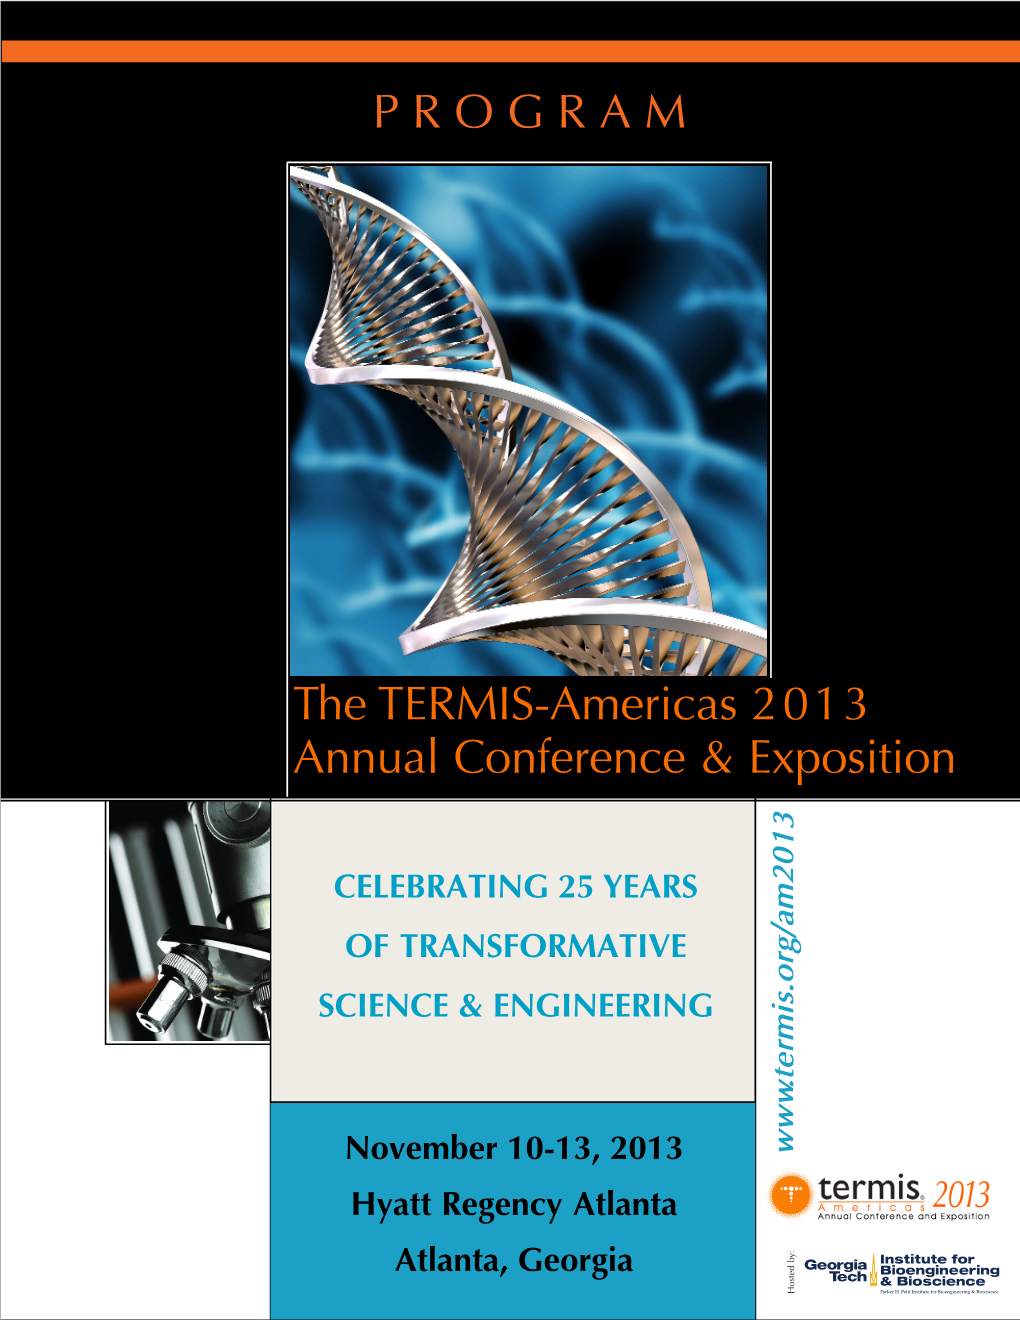 The TERMIS-Americas 2013 Annual Conference & Exposition PROGRAM